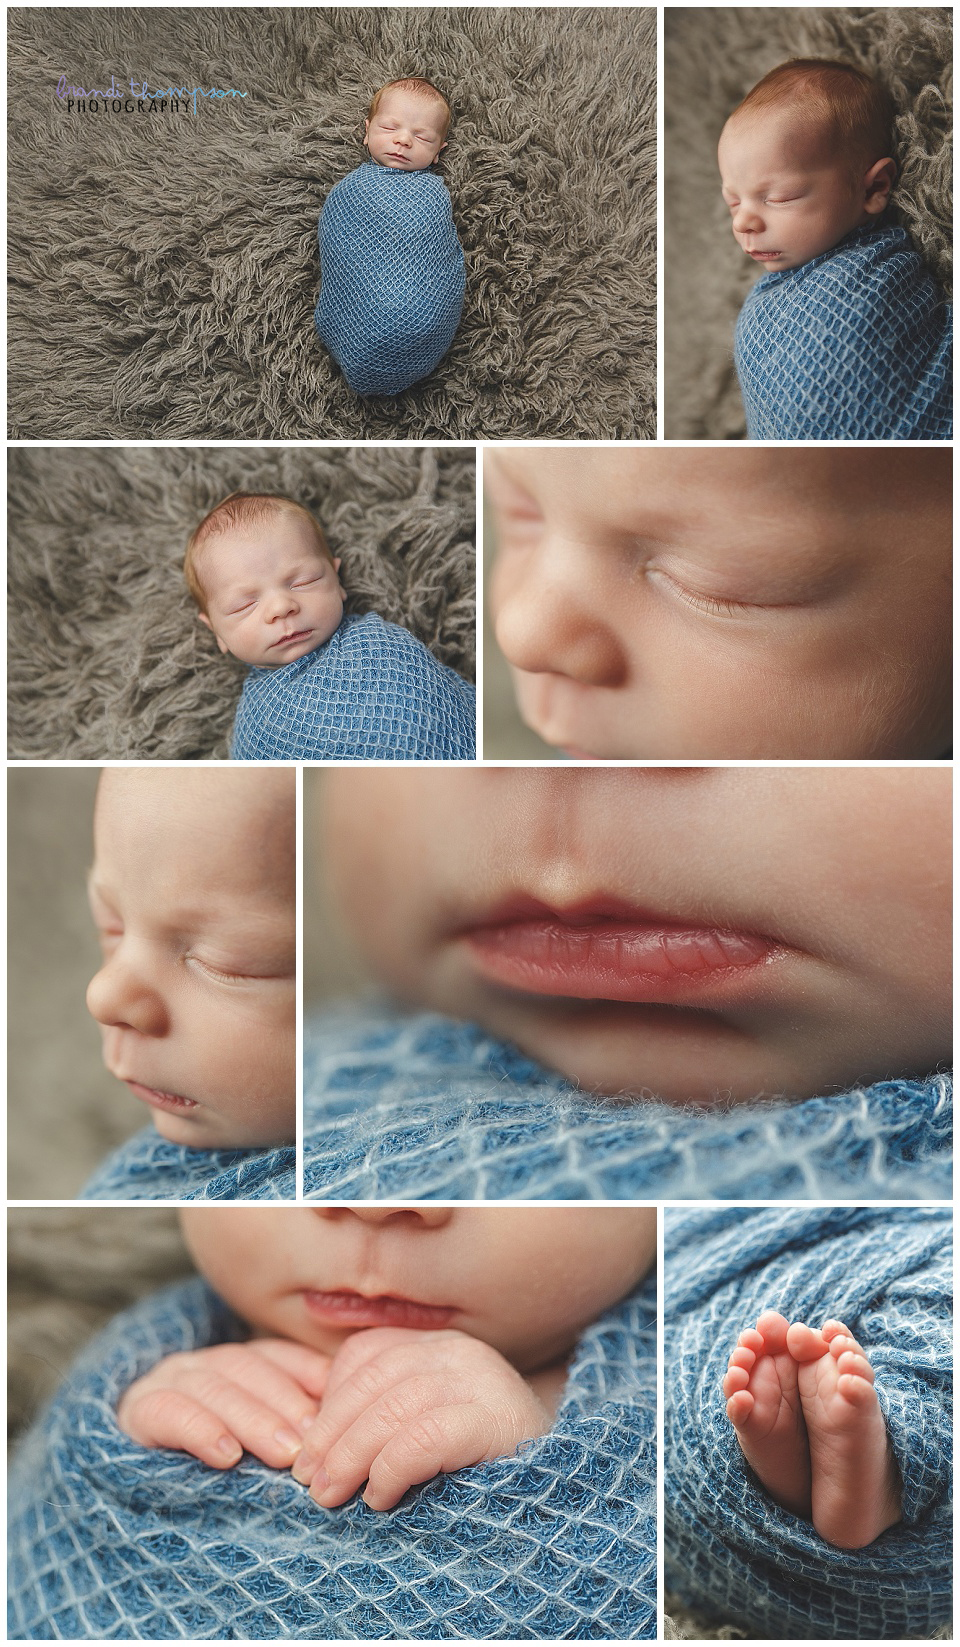 sleeping newborn baby boy, including close up images, newborn photography in plano, tx